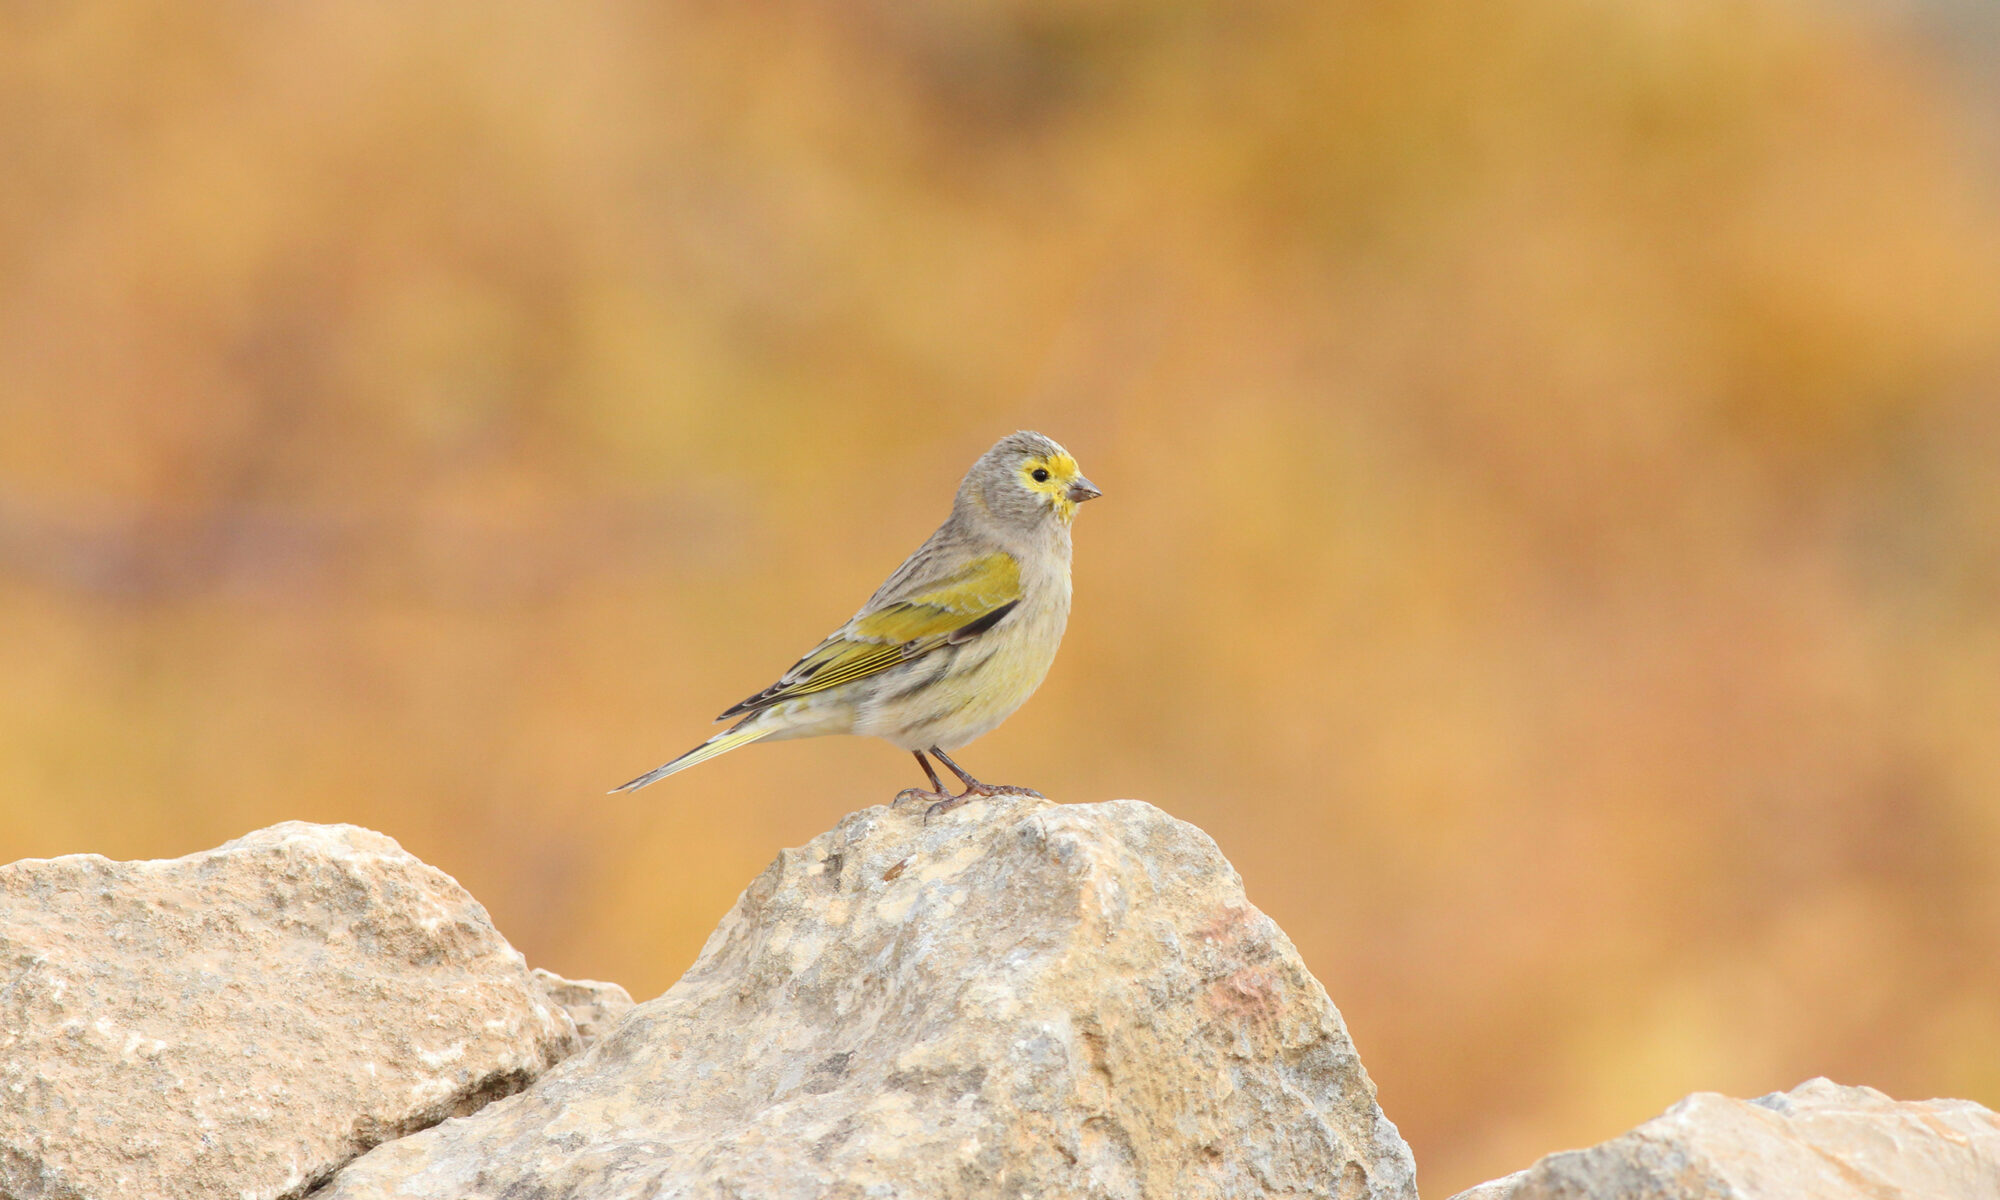 Syrian serin reported vulnerable IUCN